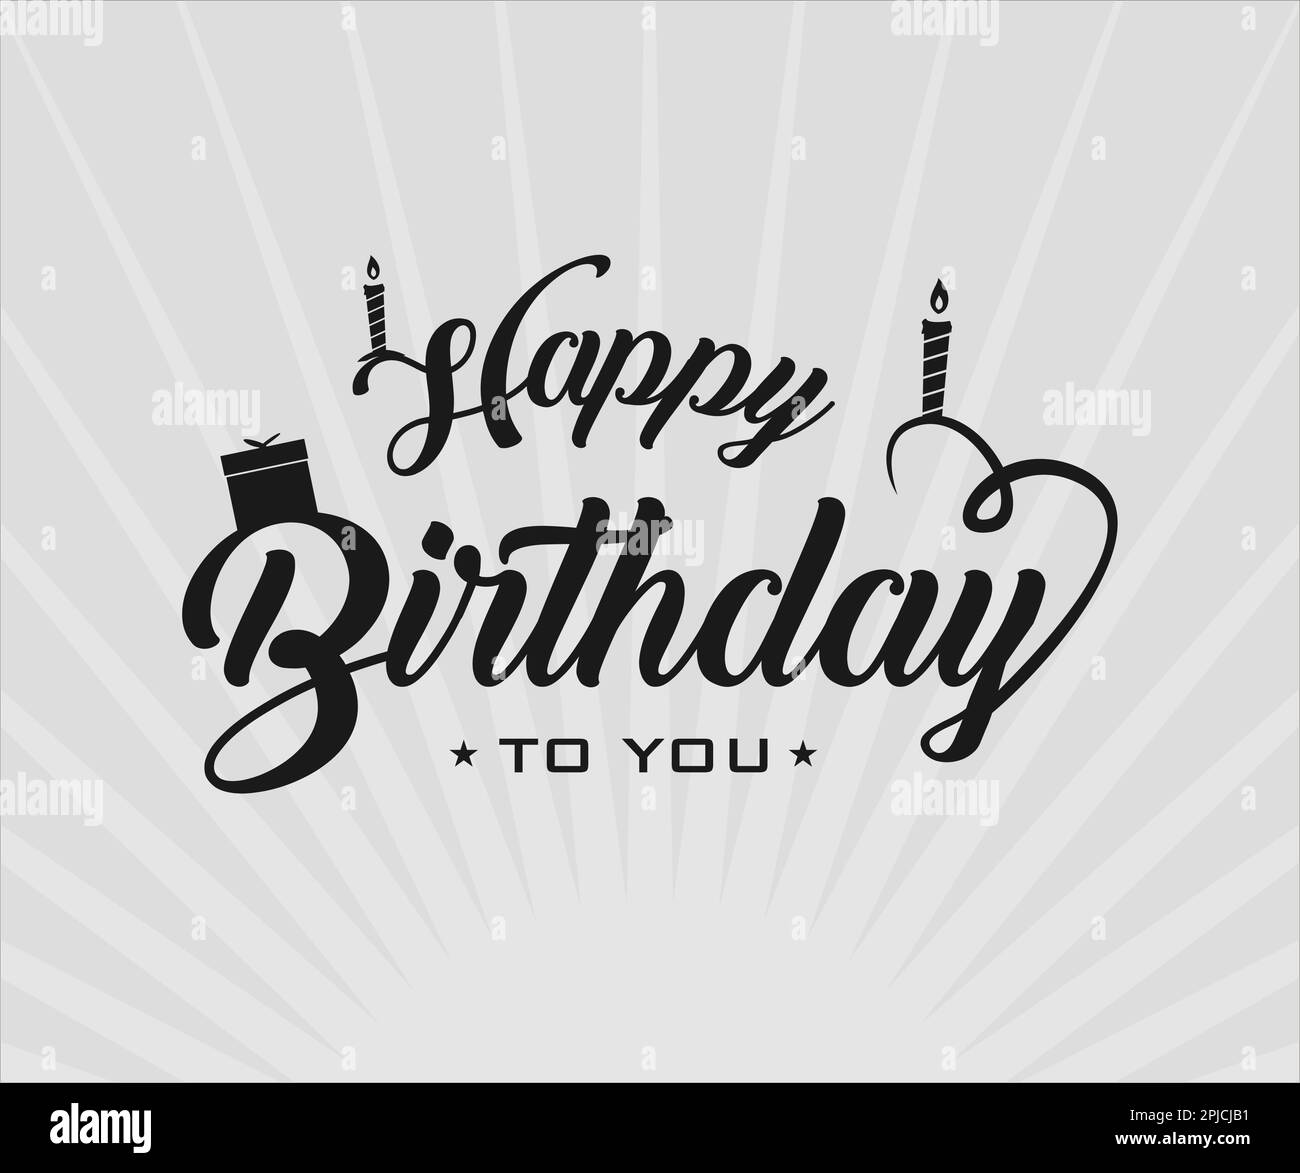 Happy Birthday Hand drawn text phrase. Calligraphy lettering word ...